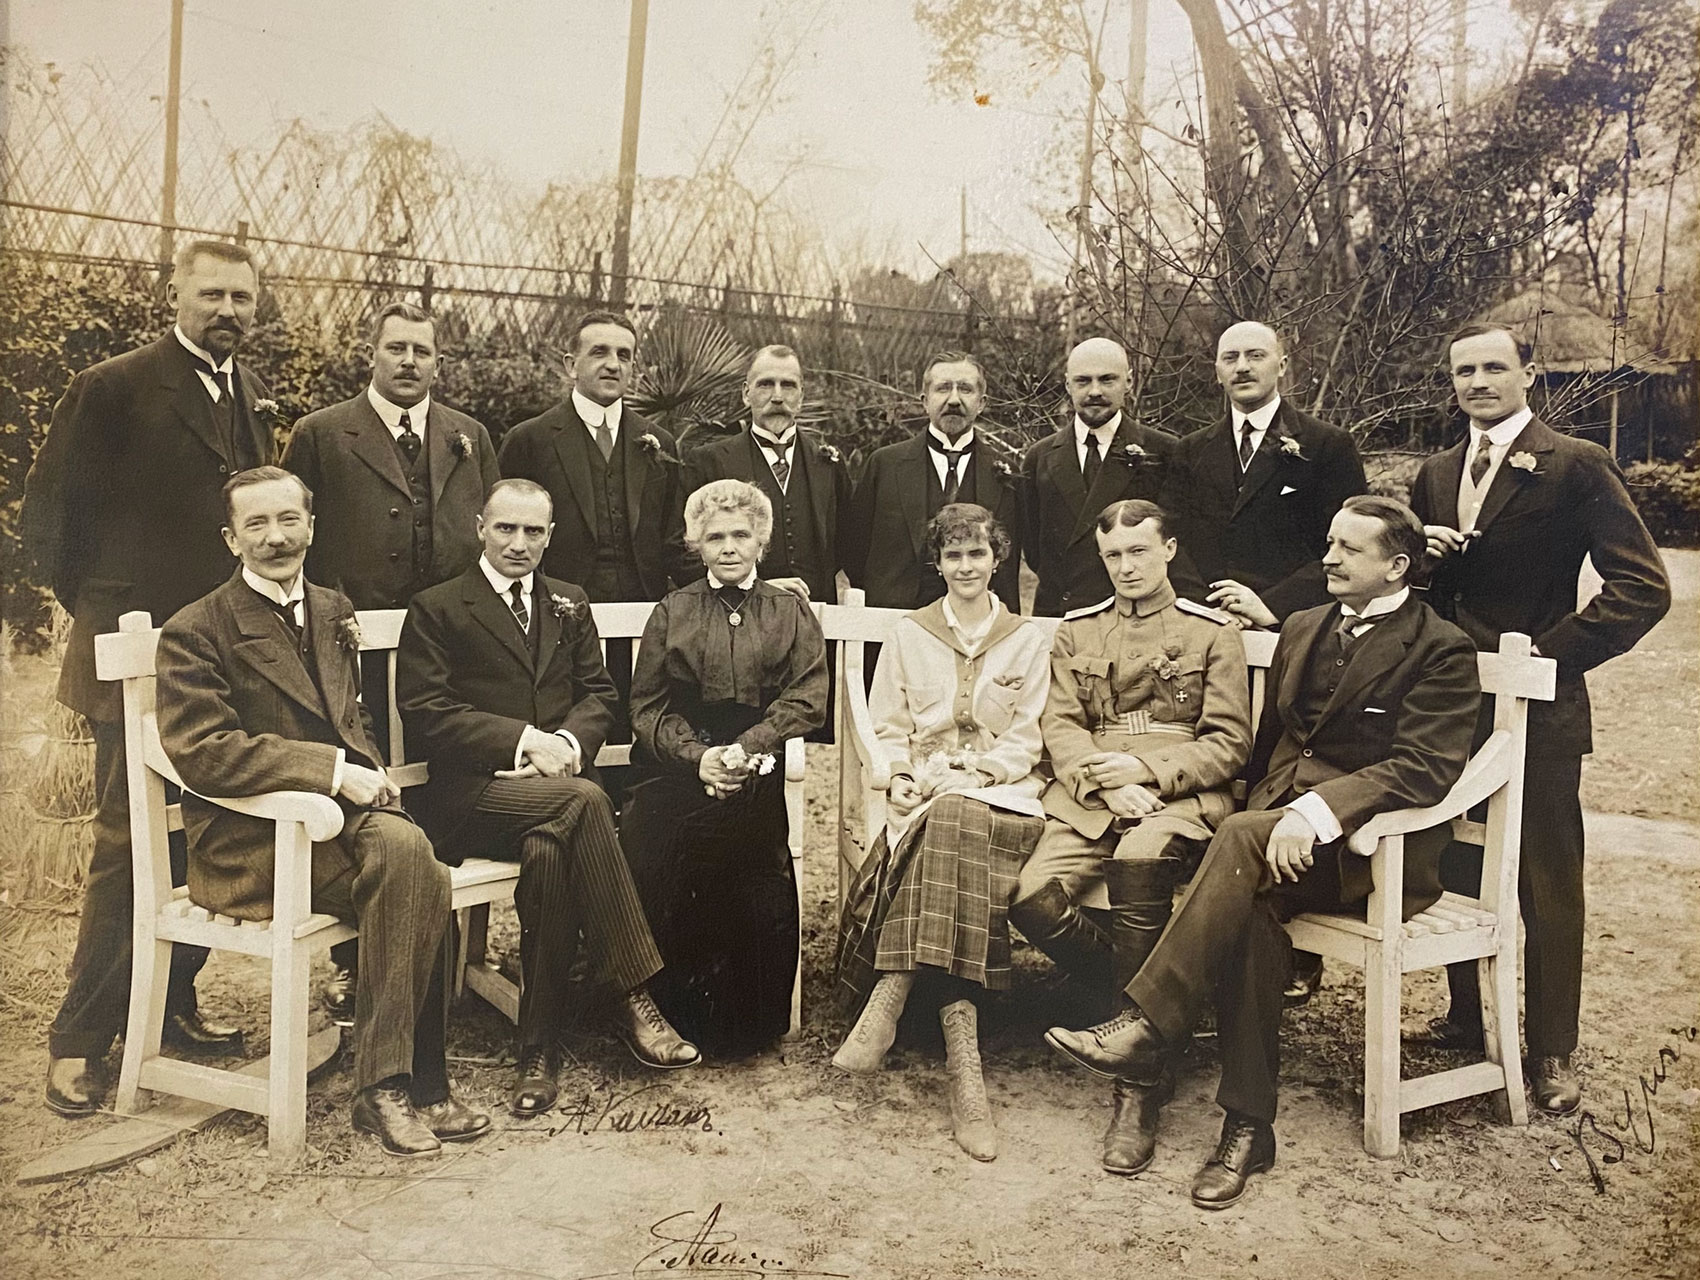 Synnerberg group photo with Russian diplomats in Shanghai